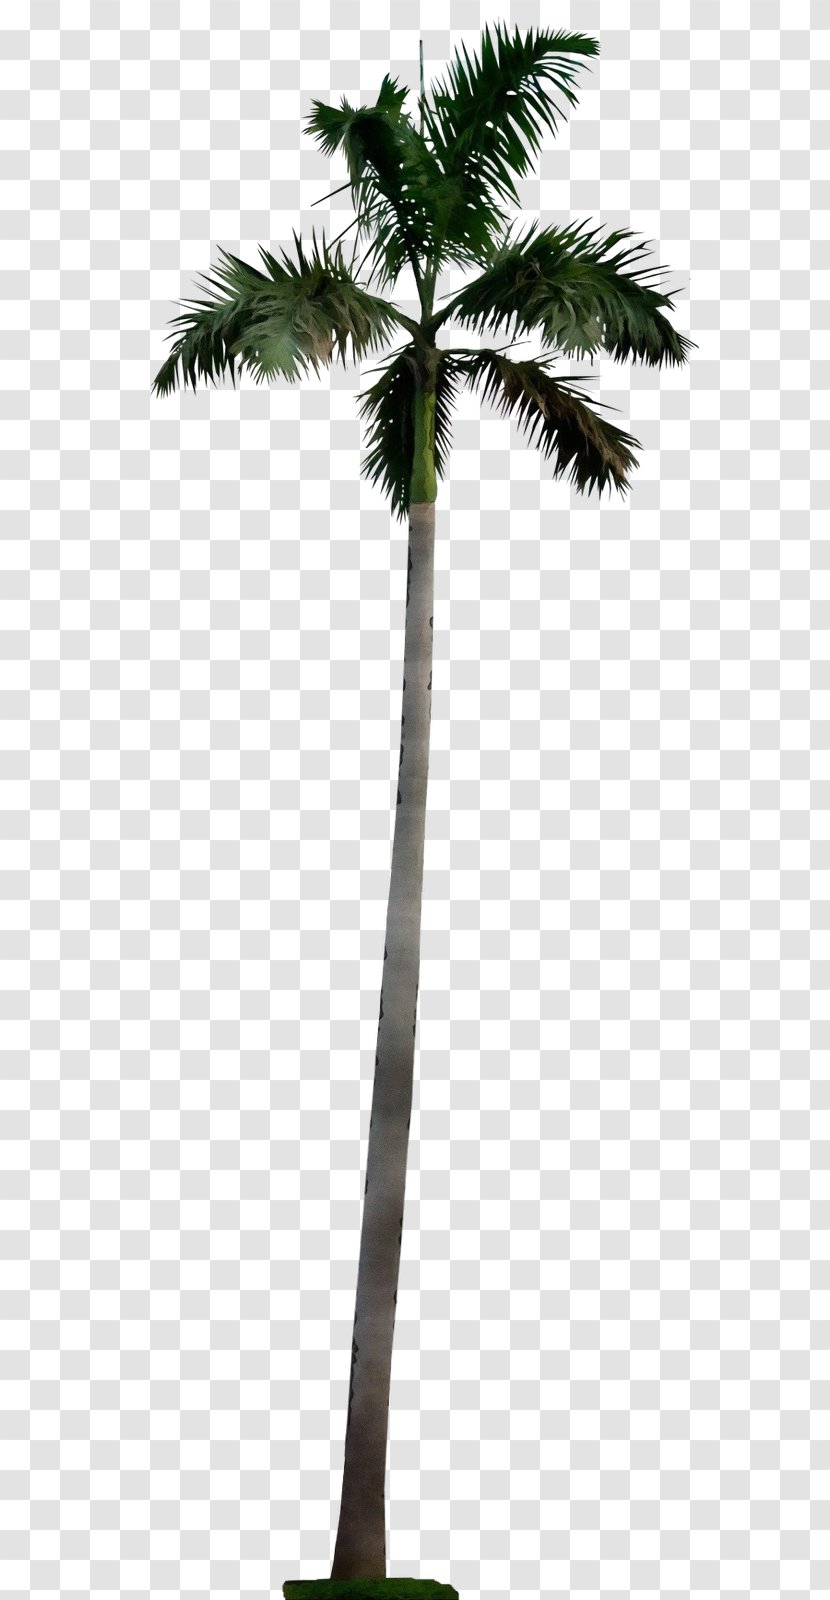 Cartoon Palm Tree - Arecales - Branch Twig Transparent PNG